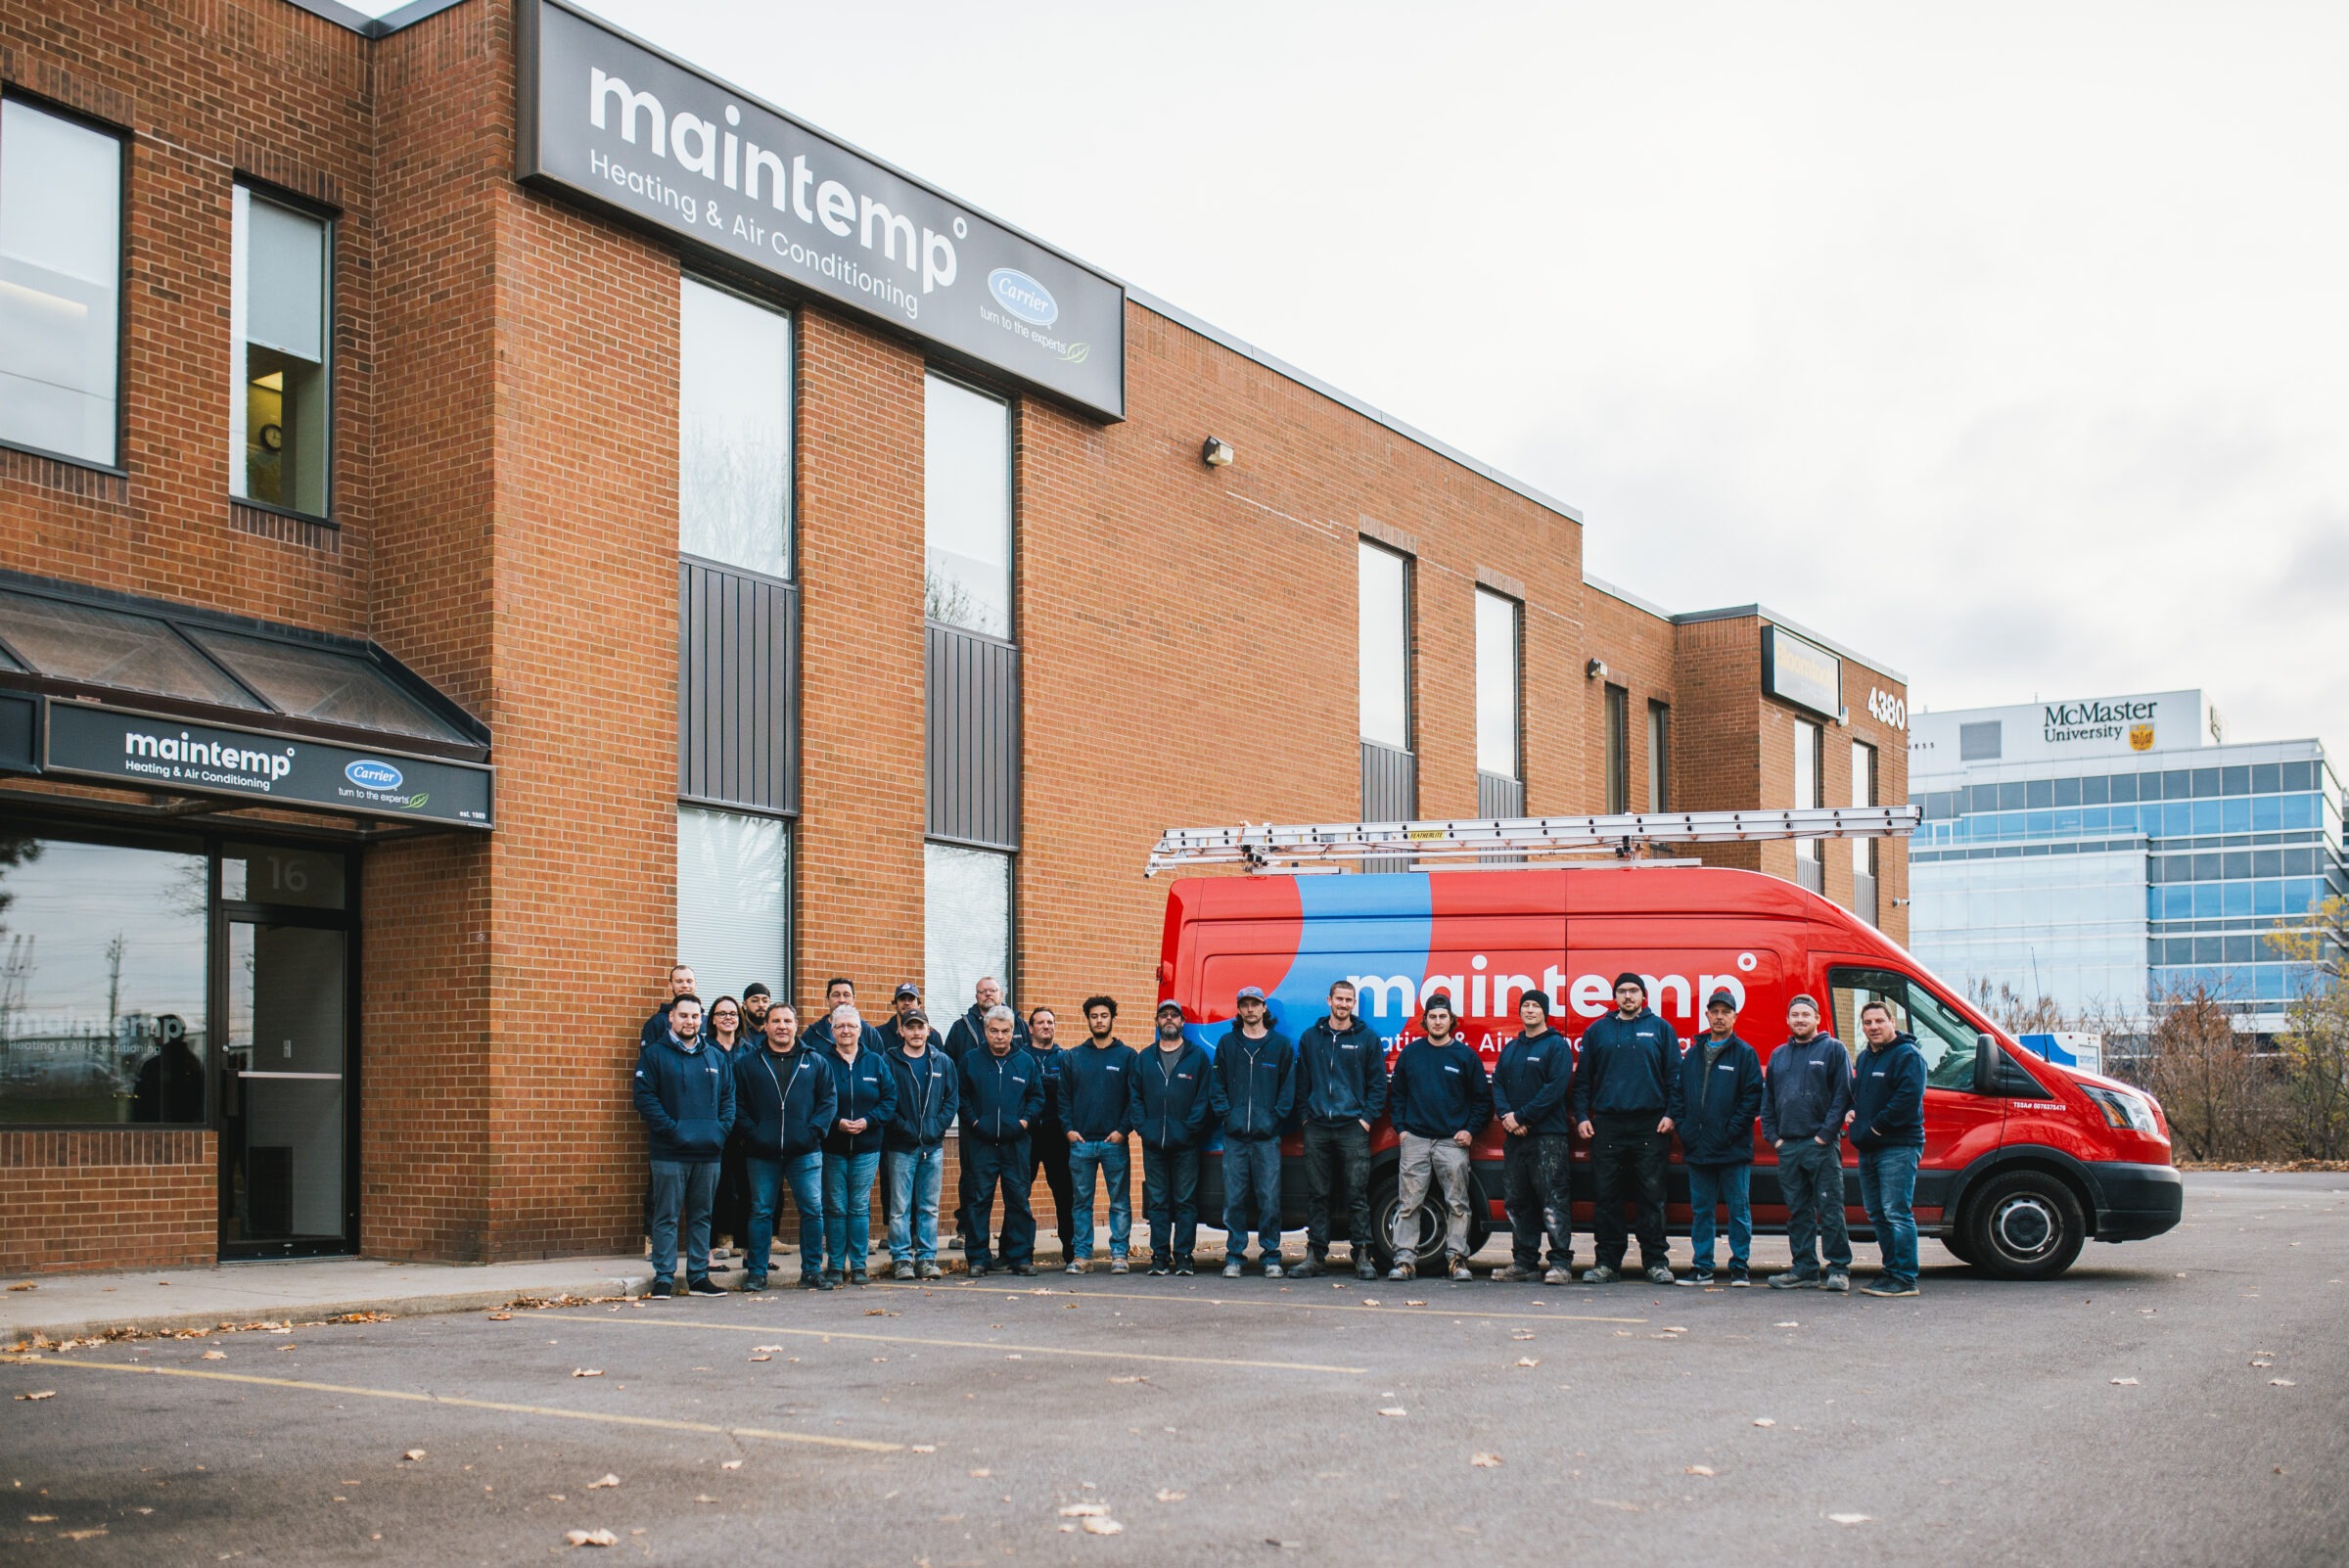 A group of people in matching blue jackets stands outside an industrial building beside a red van with "maintemp" logos.